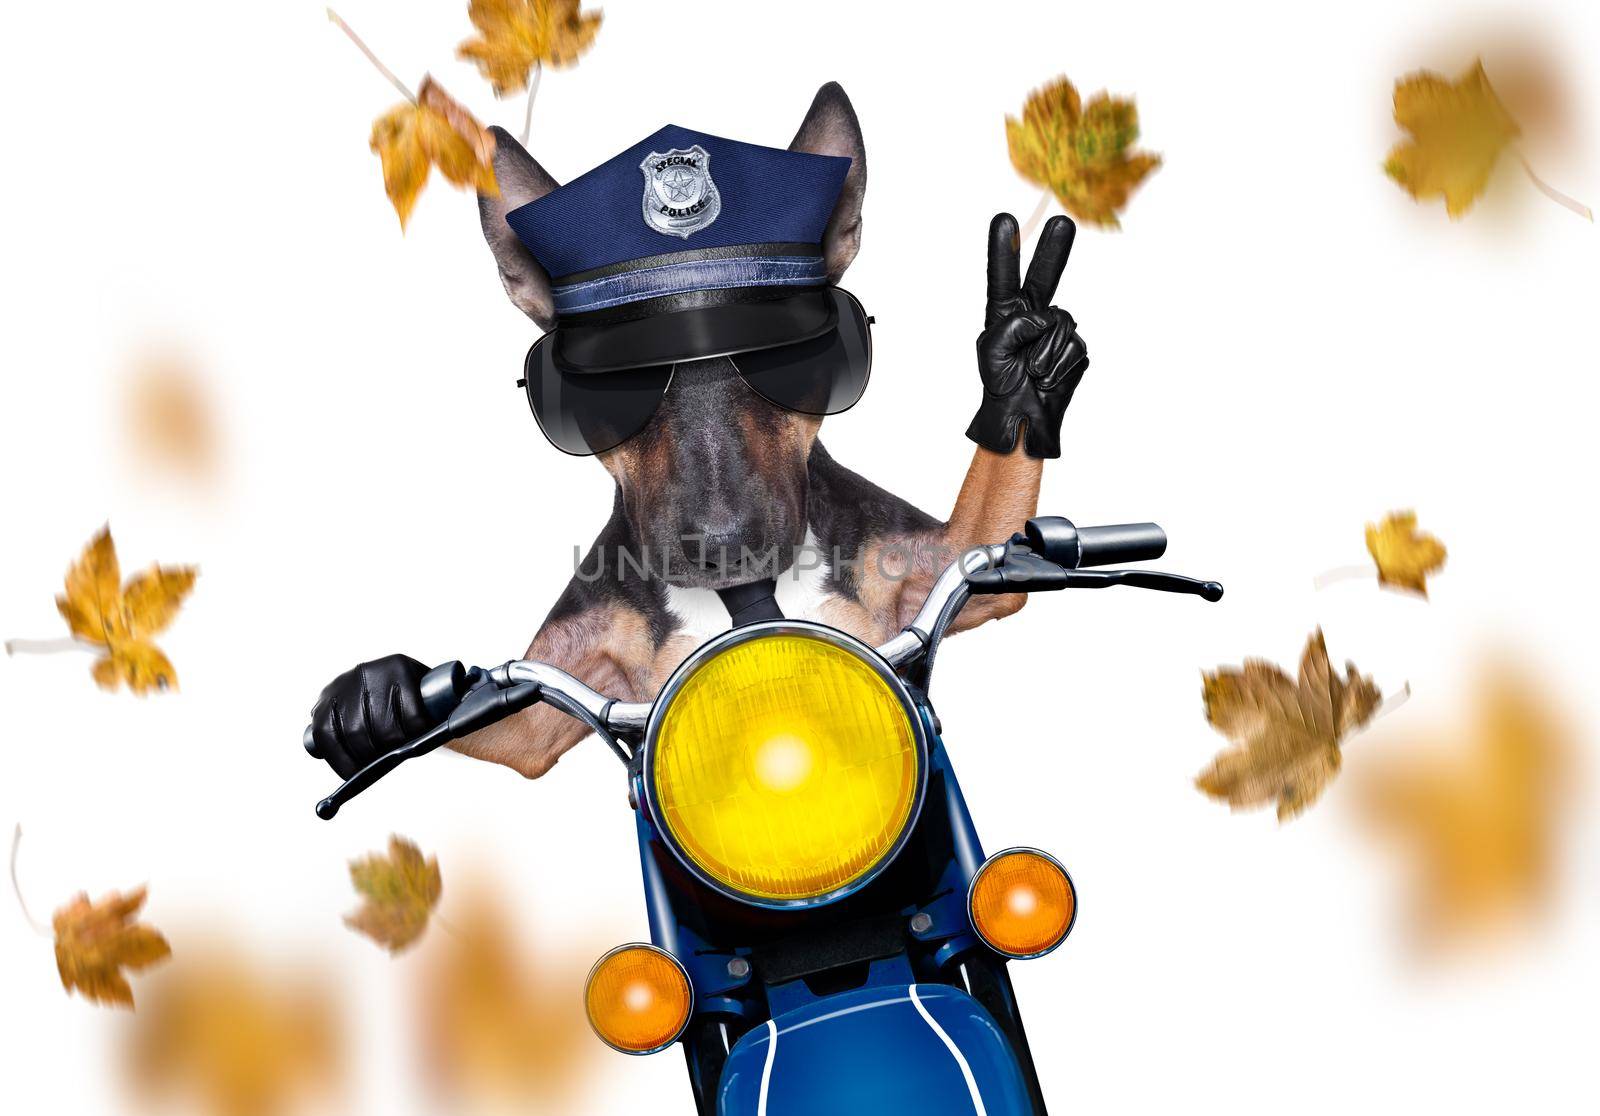 motorcycle diva lady fancy  dog driving a motorbike with sunglasses isolated on white background, in windy autumn fall with leaves flying around